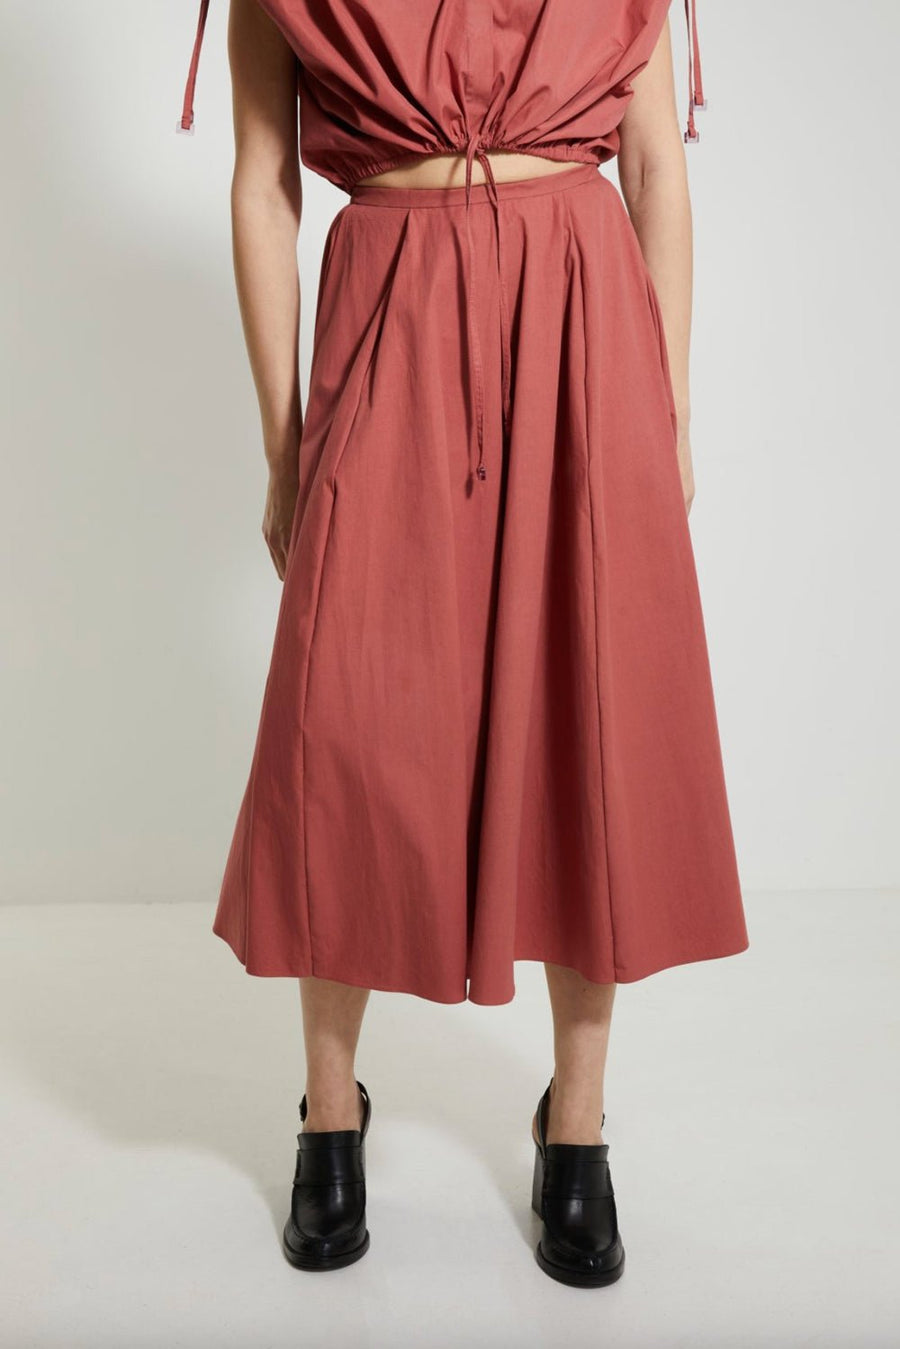 VERONIQUE LEROY - Cotton Poplin Pleated Circle Skirt in Canyon